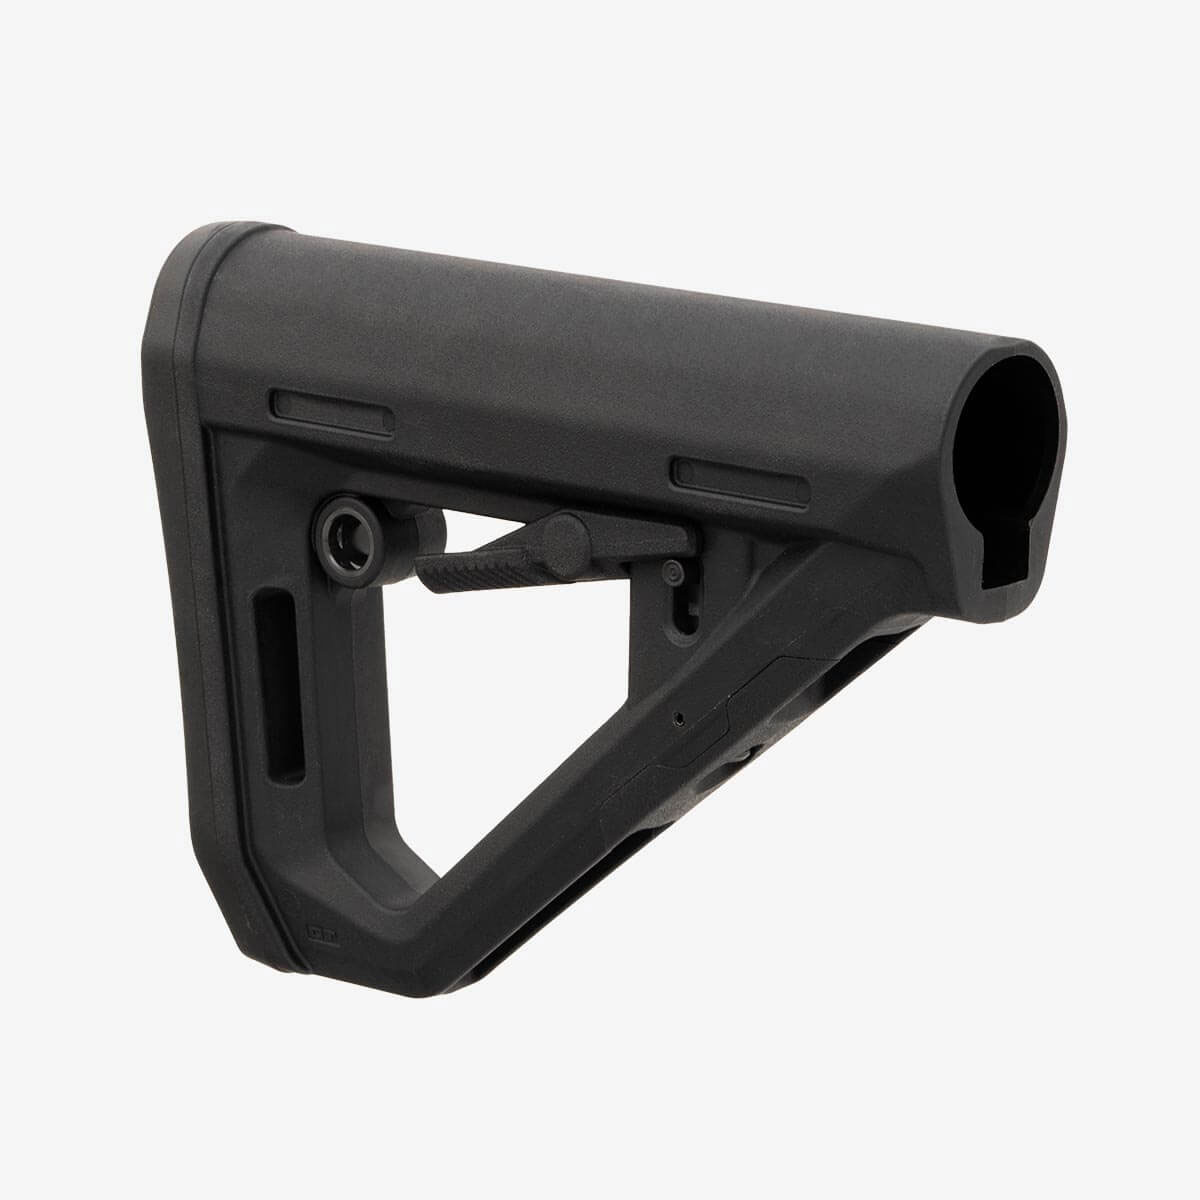 MAGPUL - DT COLLAPSIBLE MIL-SPEC CARBINE STOCK FOR AR-15